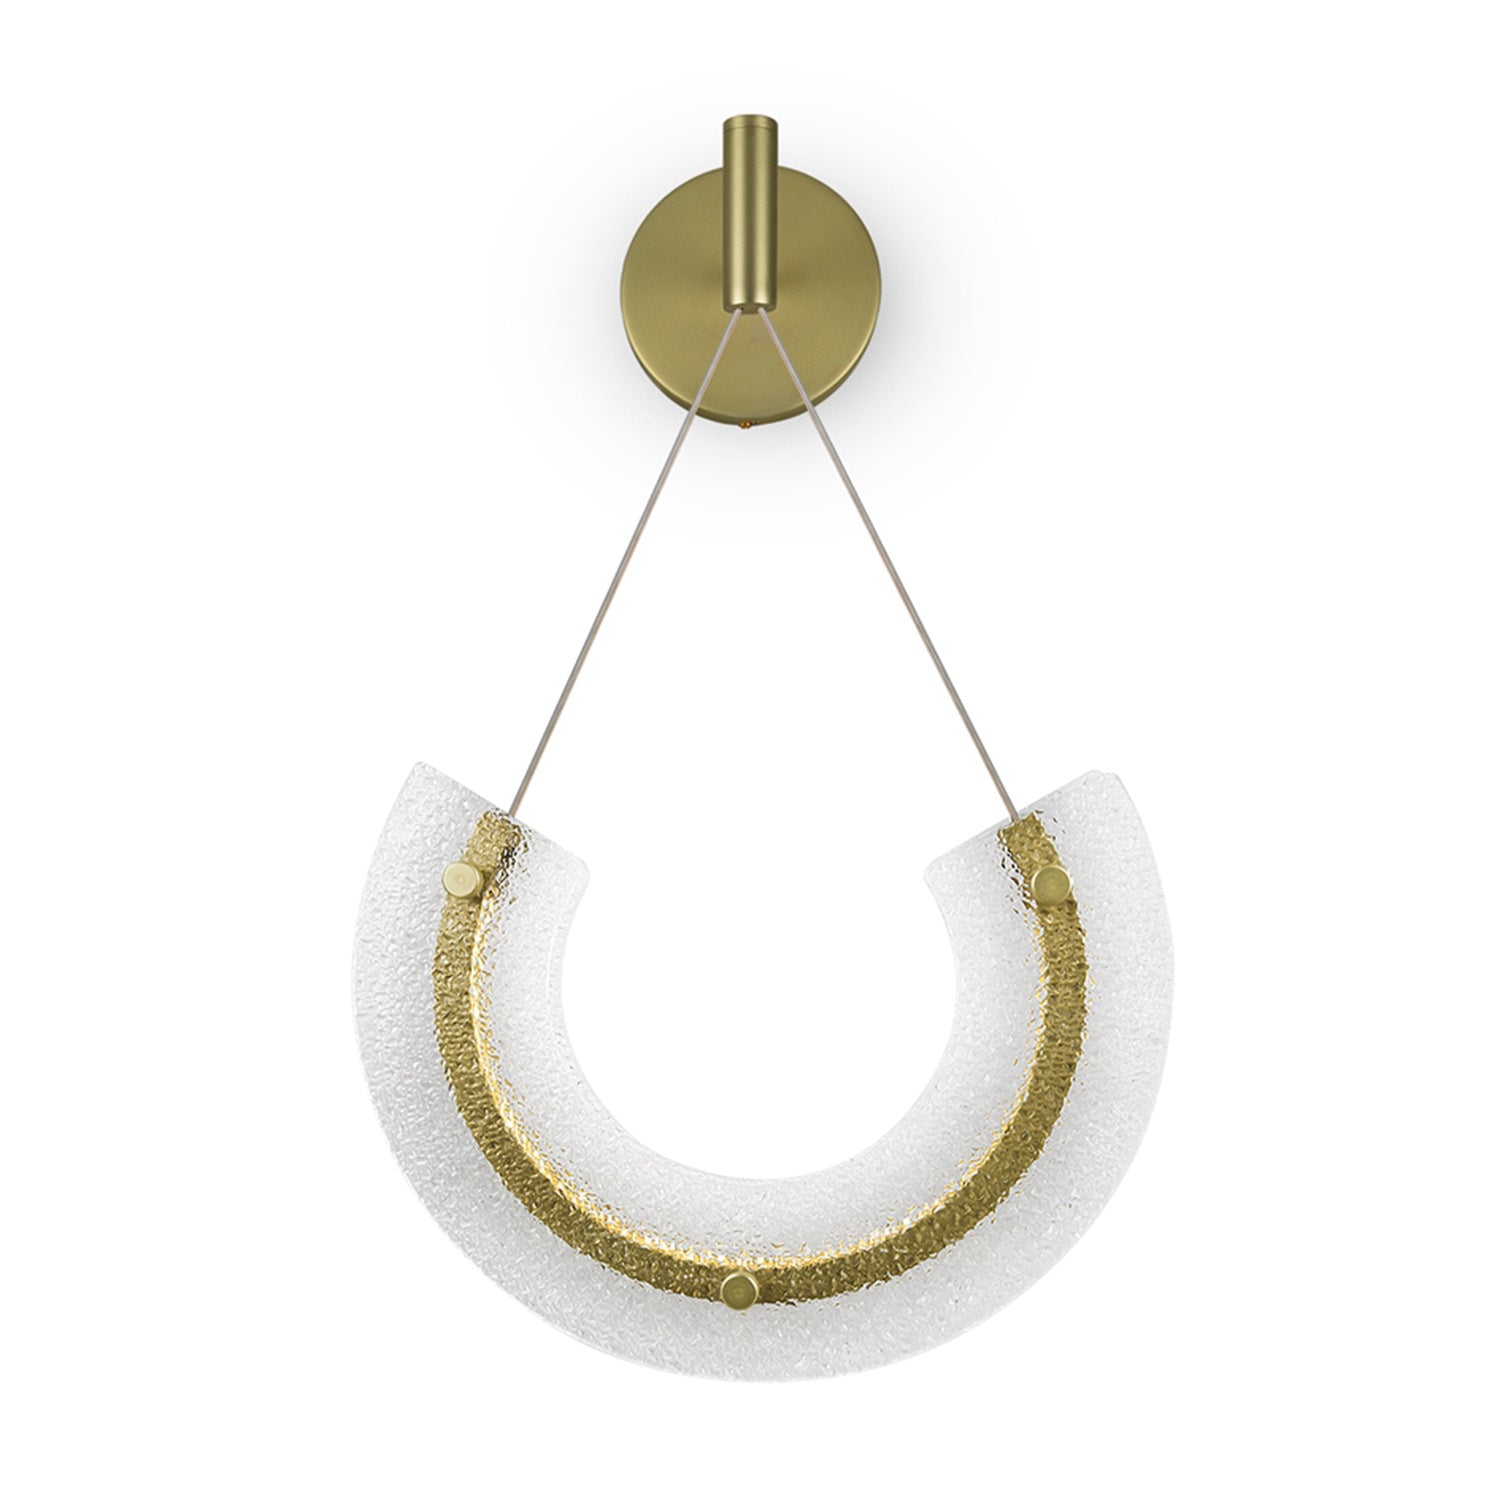 MAYA - Designer wall light in gold steel and glass